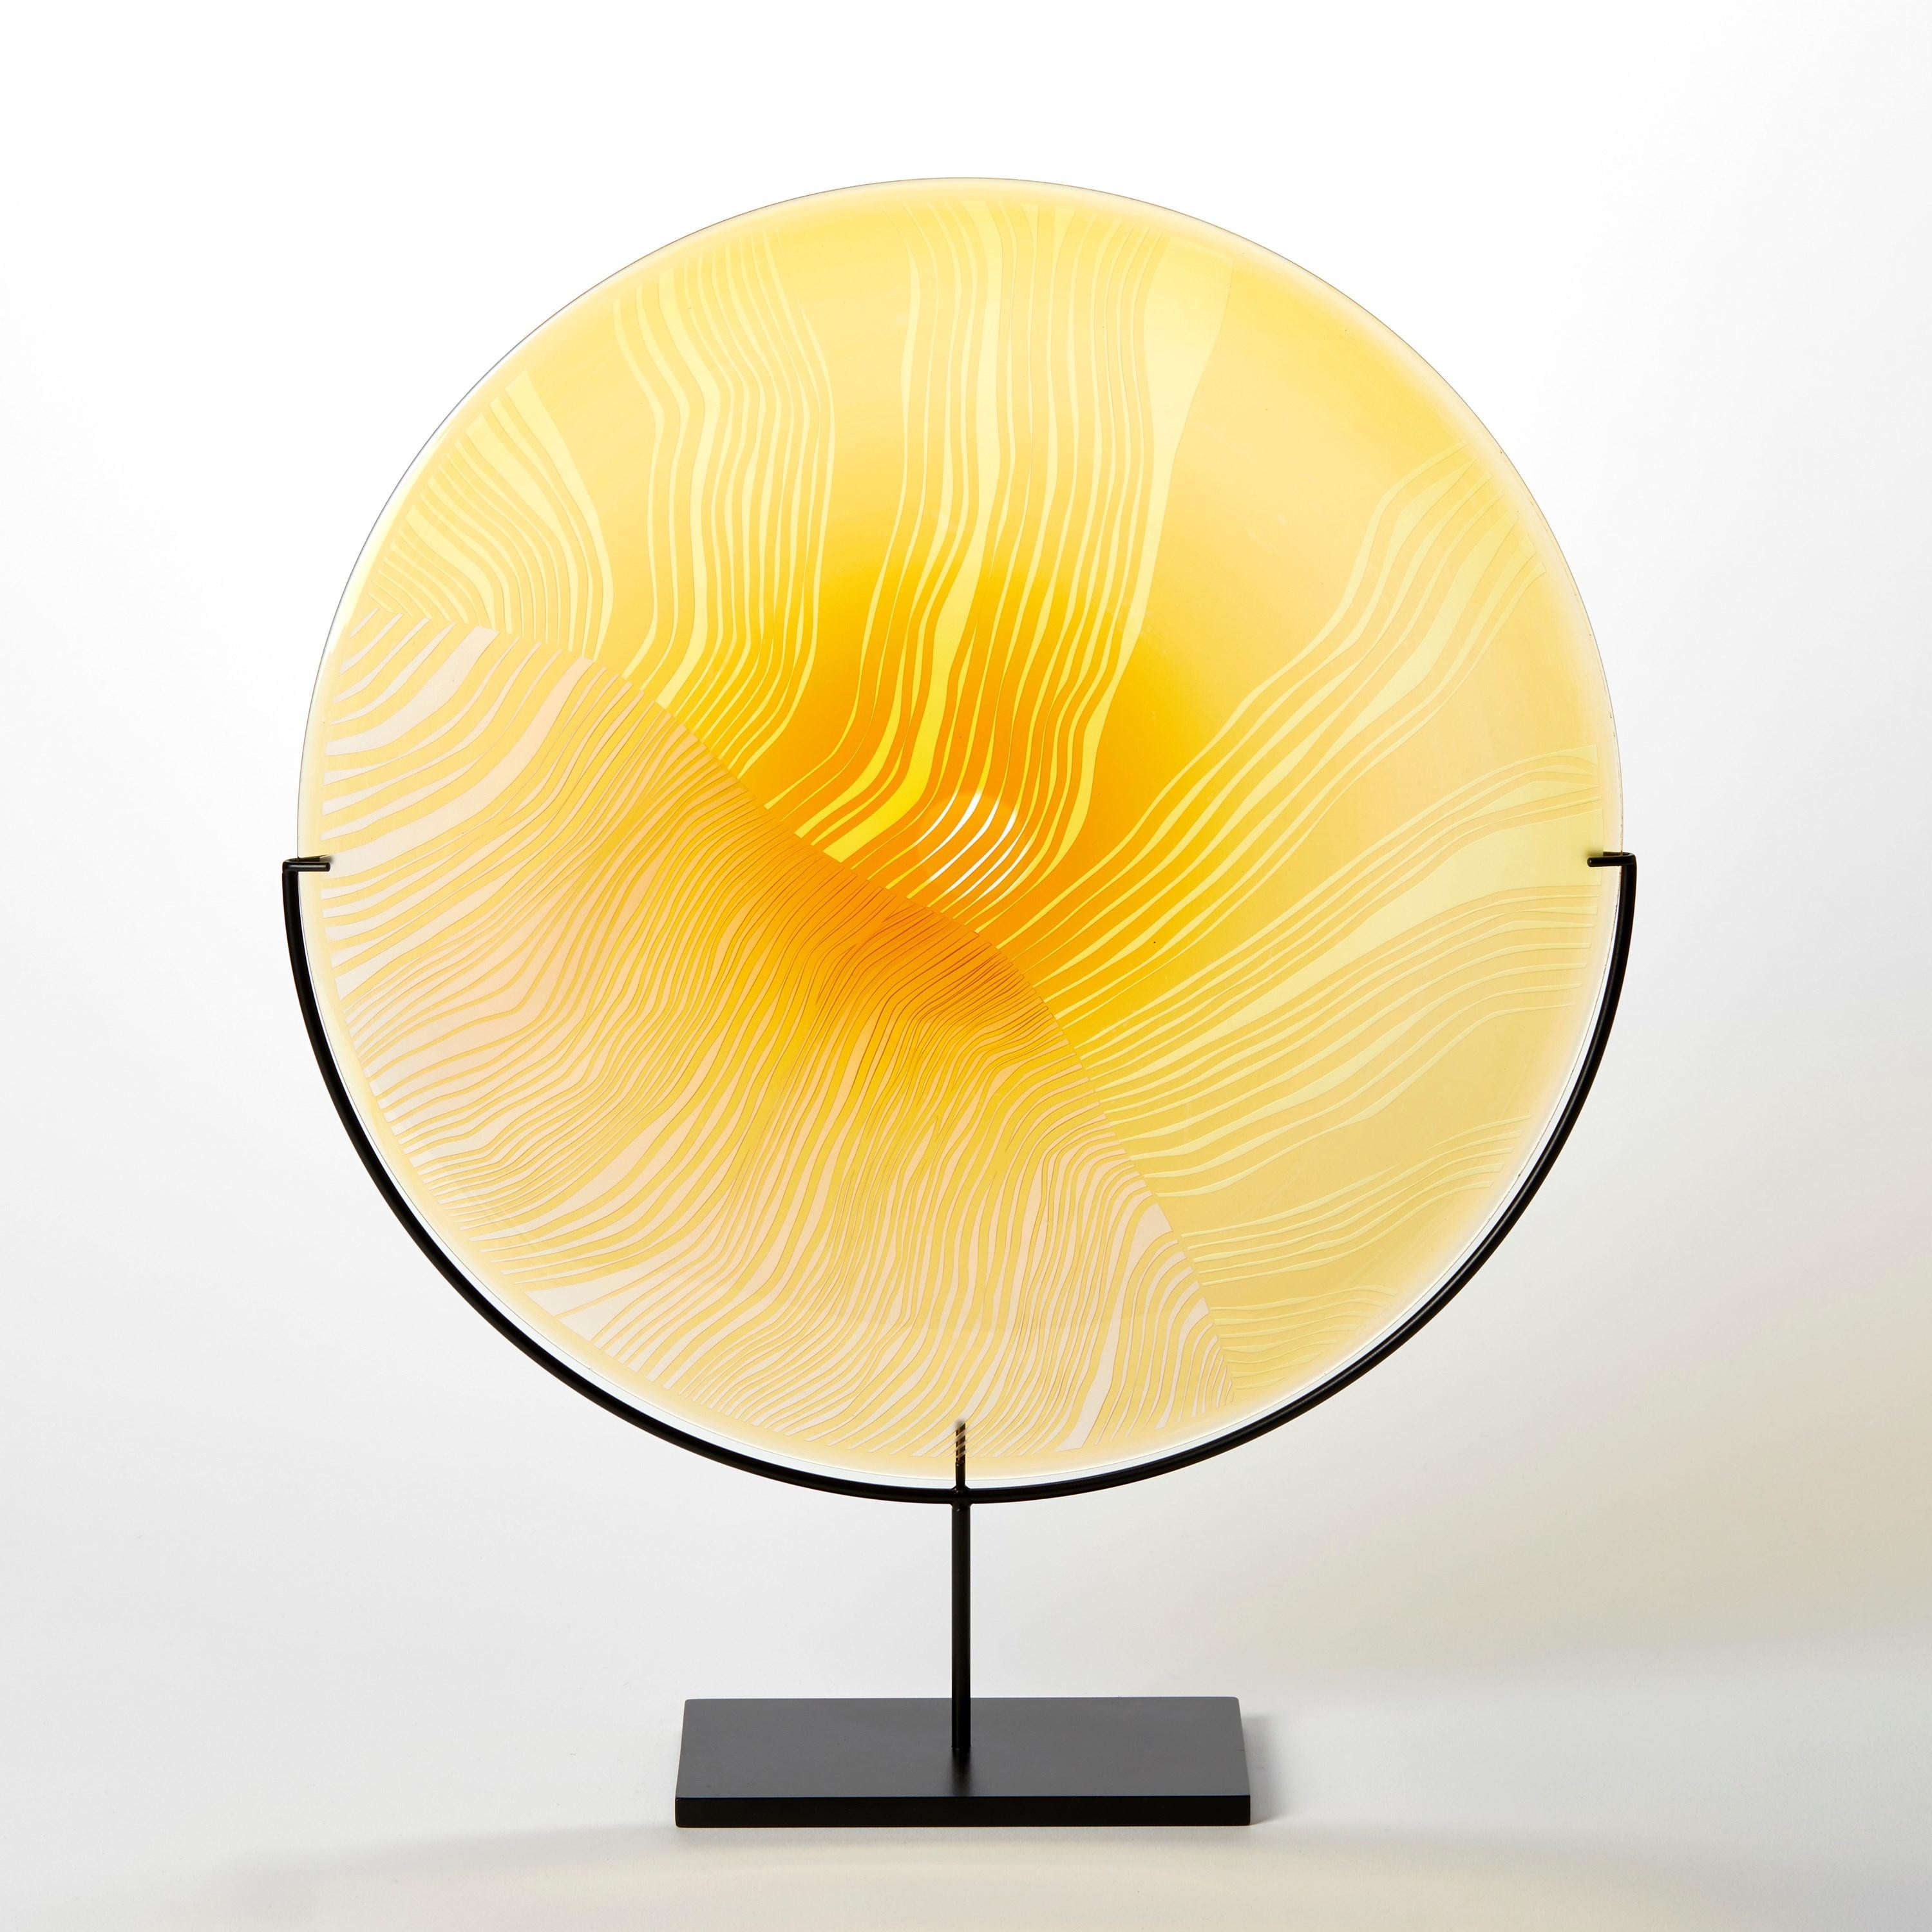 'Solar Storm Gold over Gold' is a unique handblown and cut glass artwork by the British artist, Kate Jones of Gillies Jones.

In the artist's own words:

“This new body of work references both the evident structure of the landscape and the vast